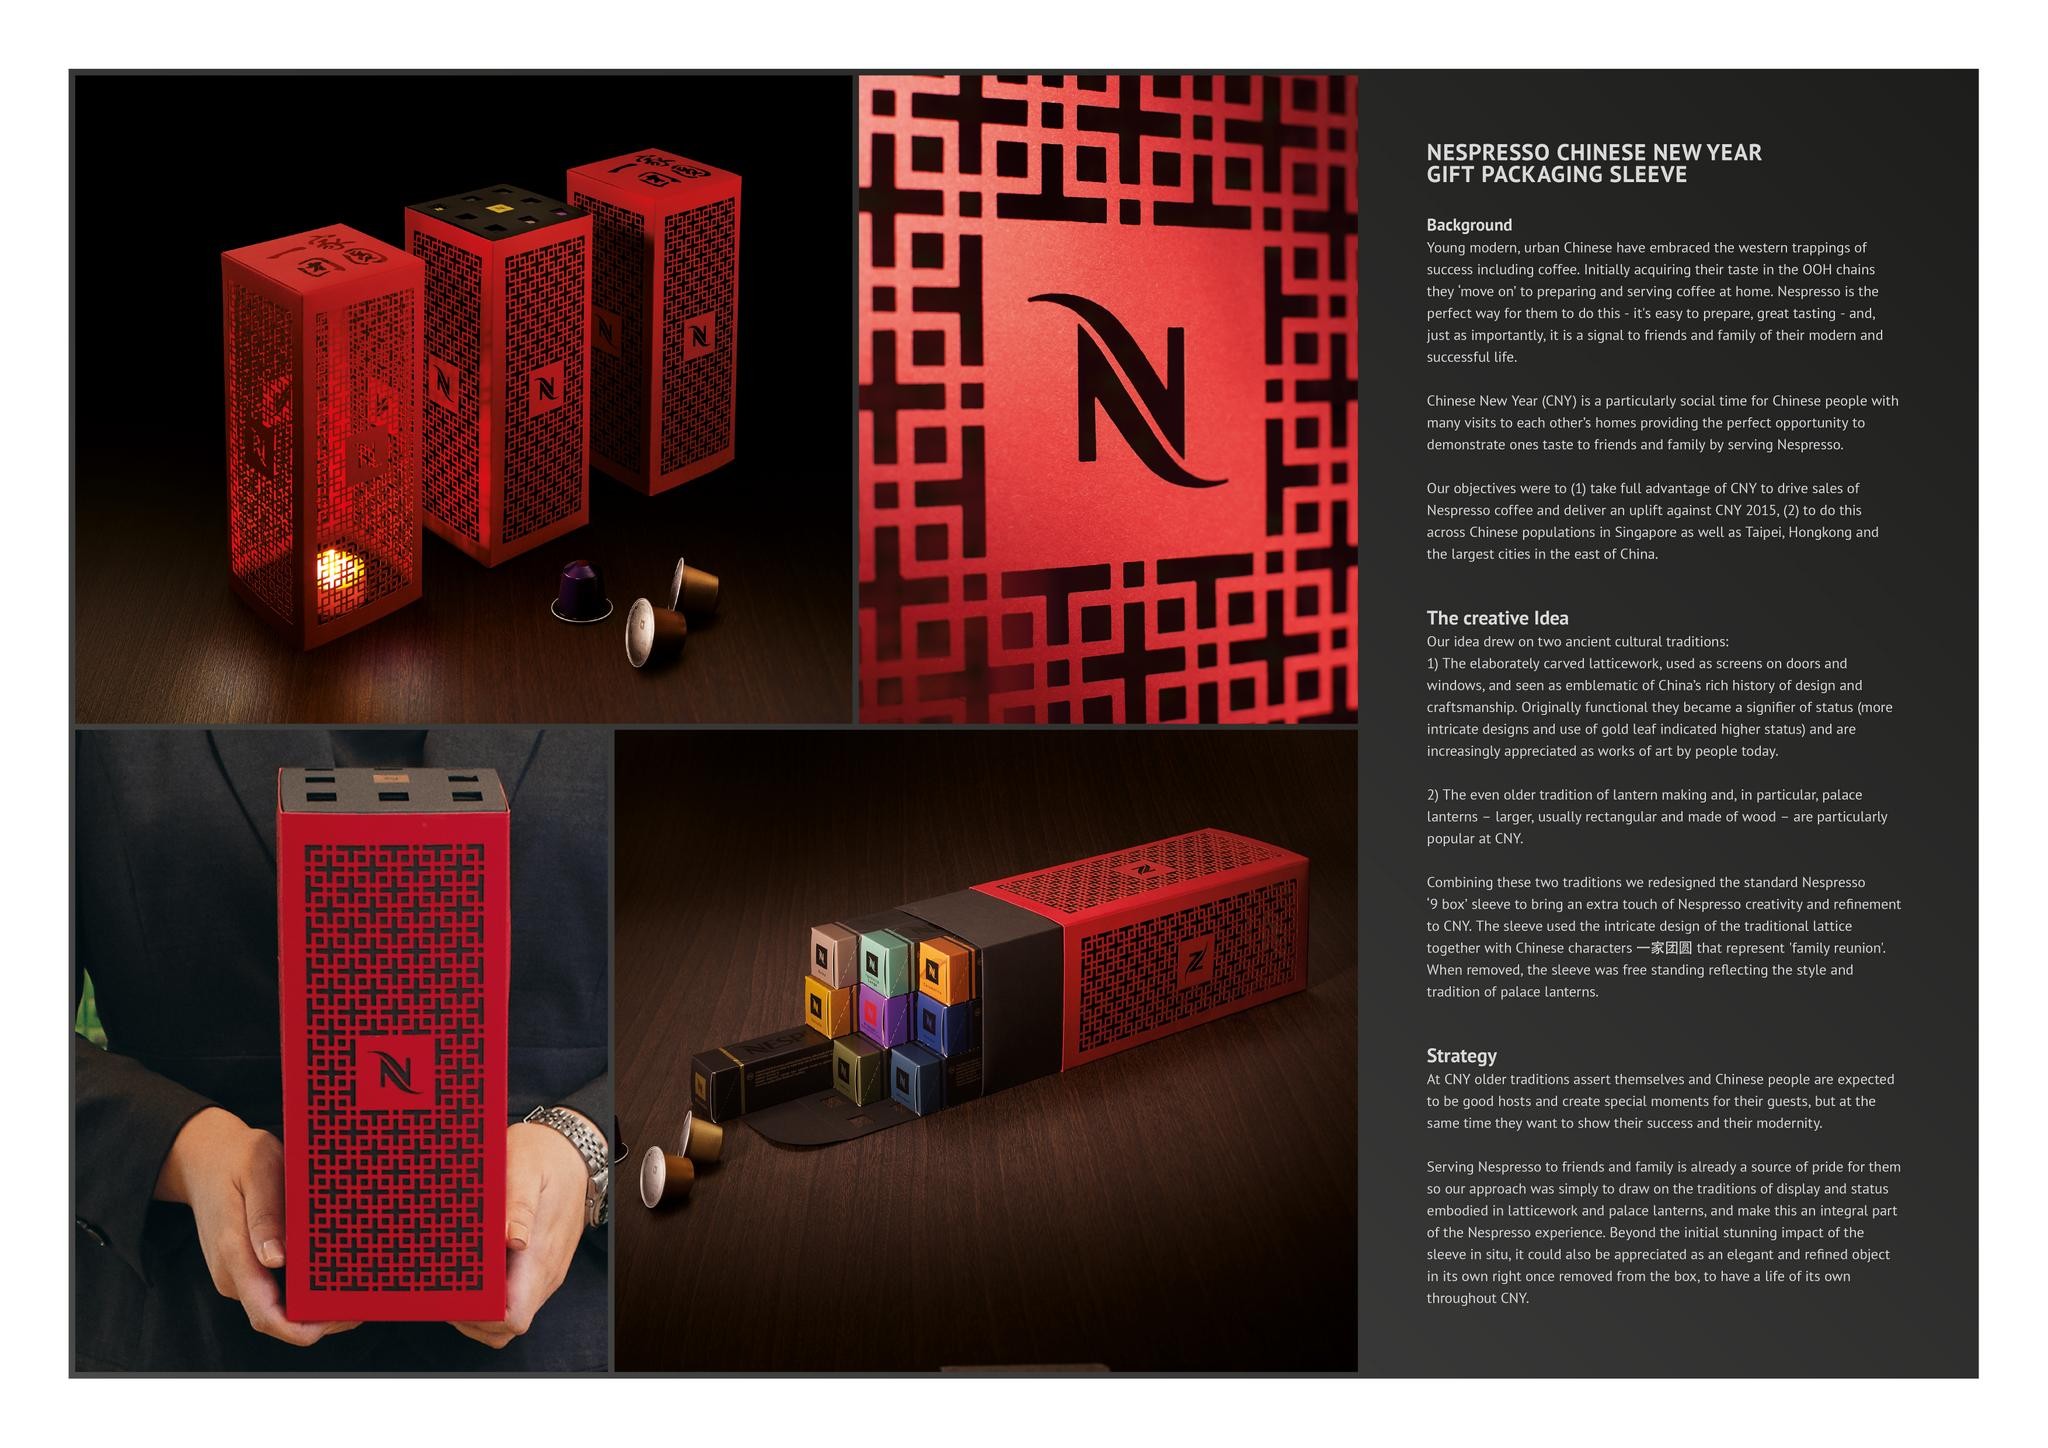 Nespresso Chinese New Year Gift Packaging Sleeve